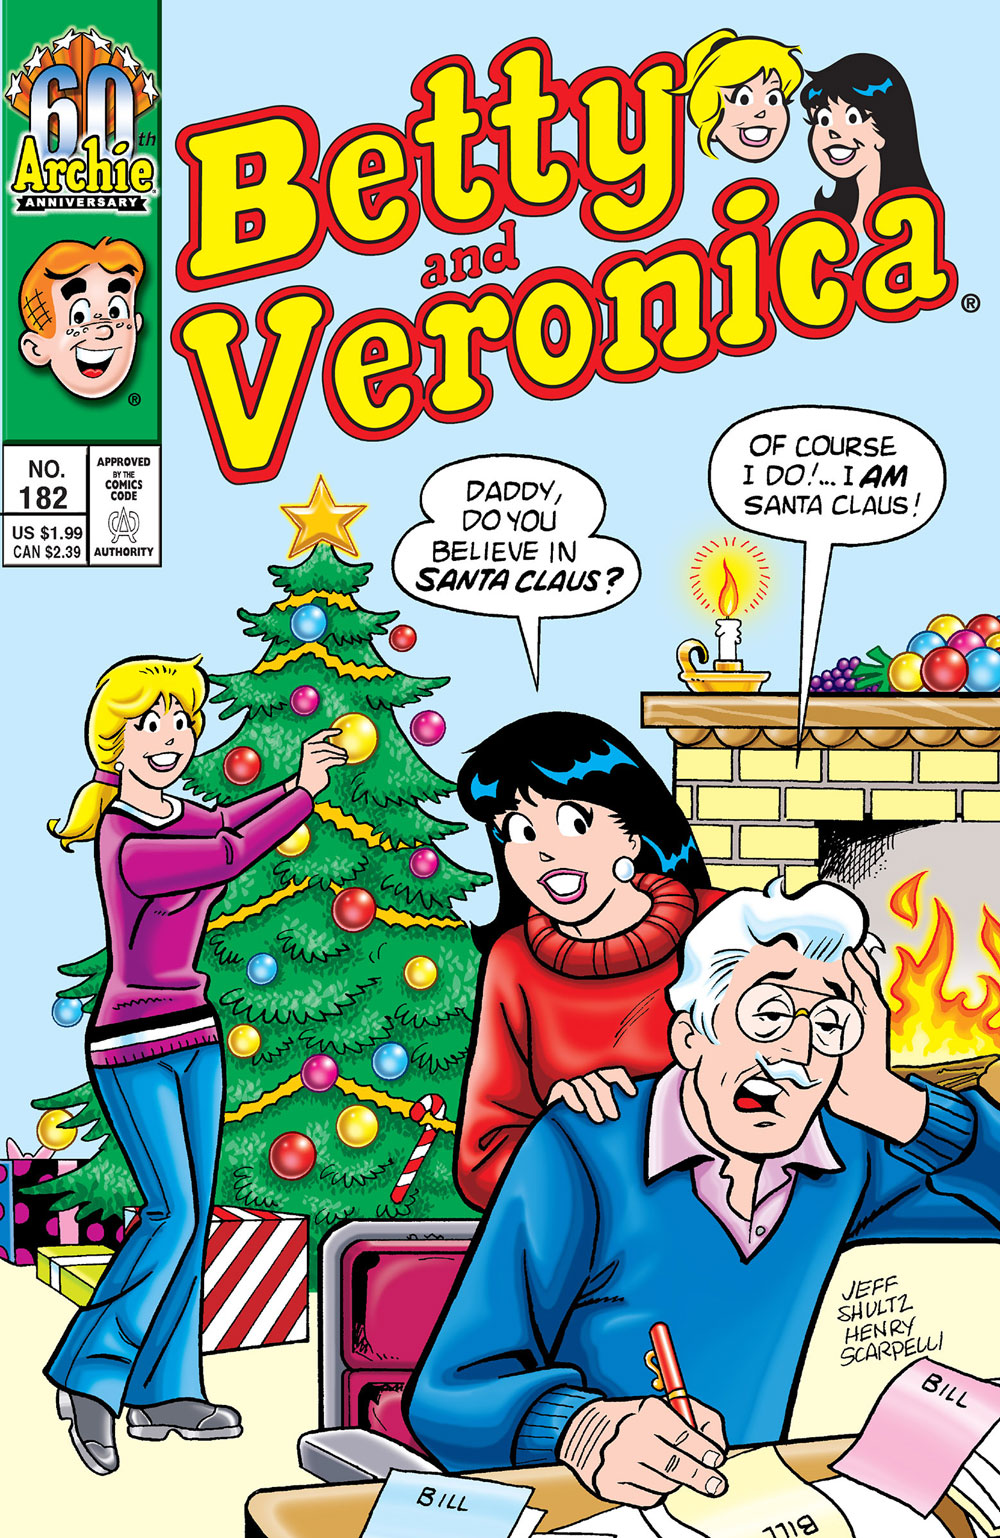 Betty and Veronica are decorating the Lodge family Christmas tree. Veronica asks Mr. Lodge if he believes in Santa Claus. Mr. Lodge is in the foreground paying bills, looking exhausted. He says of course, because he is Santa Claus.